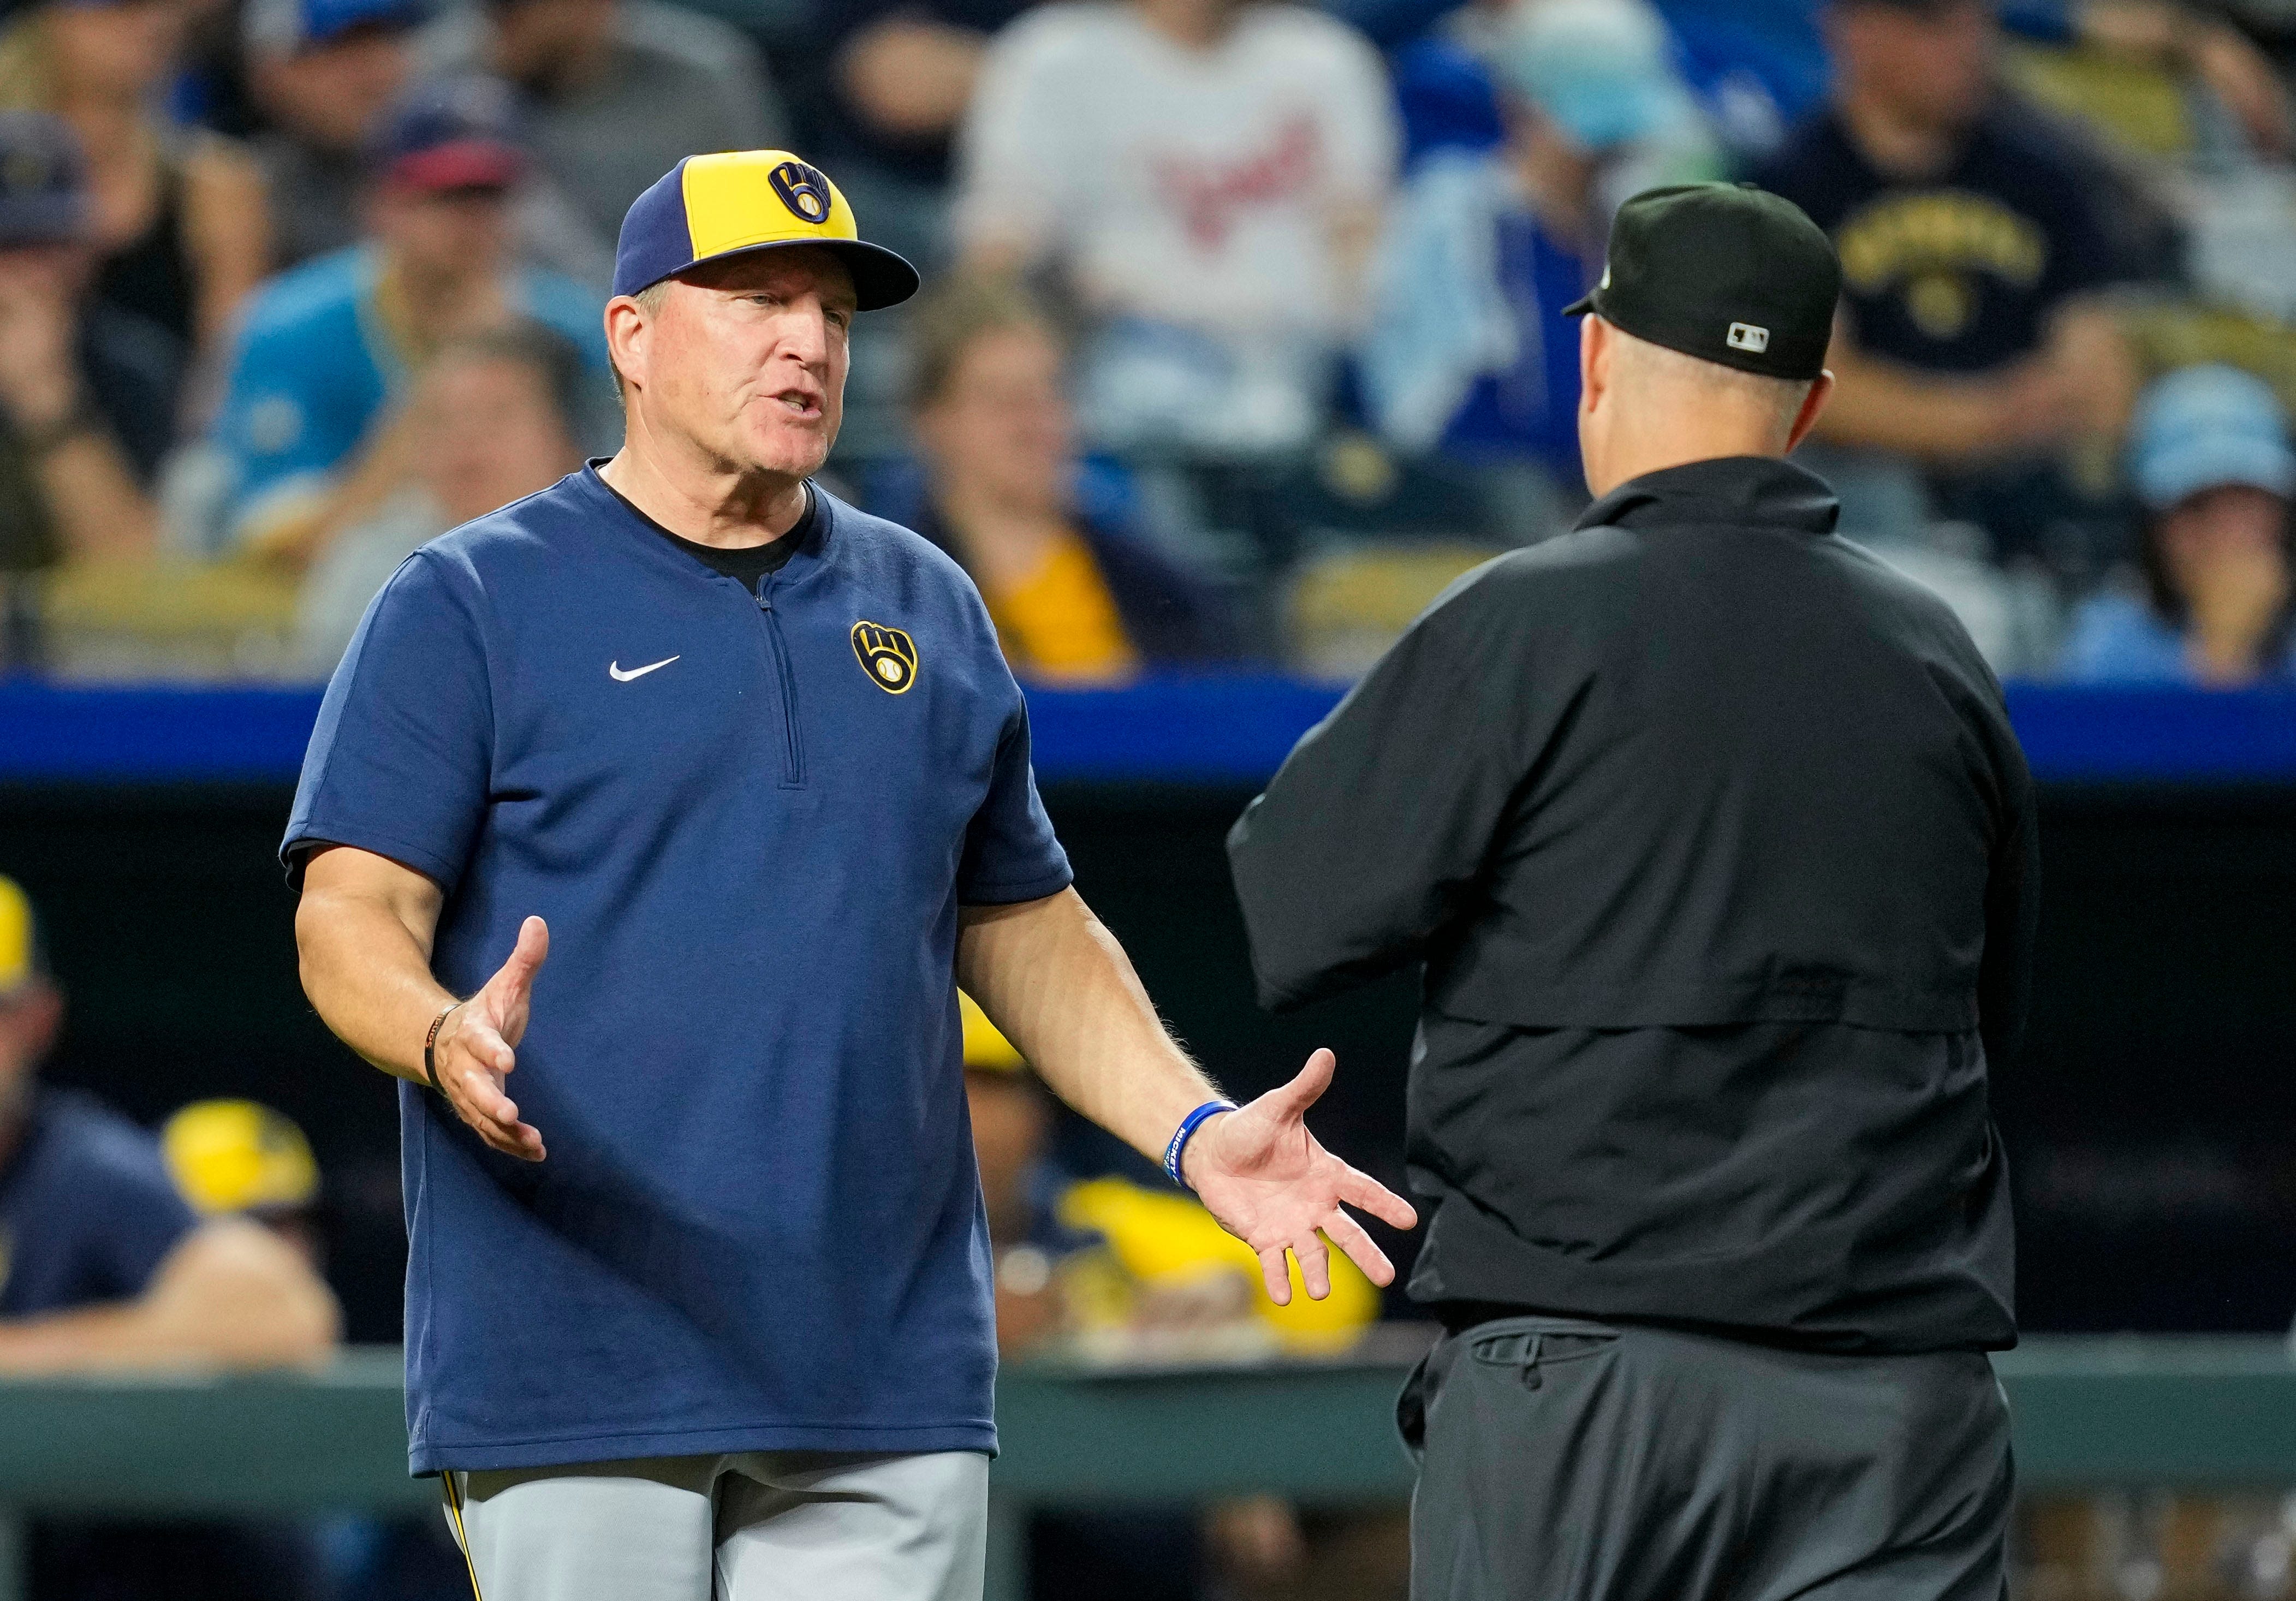 'What you see is what you get': Pat Murphy has put his stamp on Brewers through 50 games